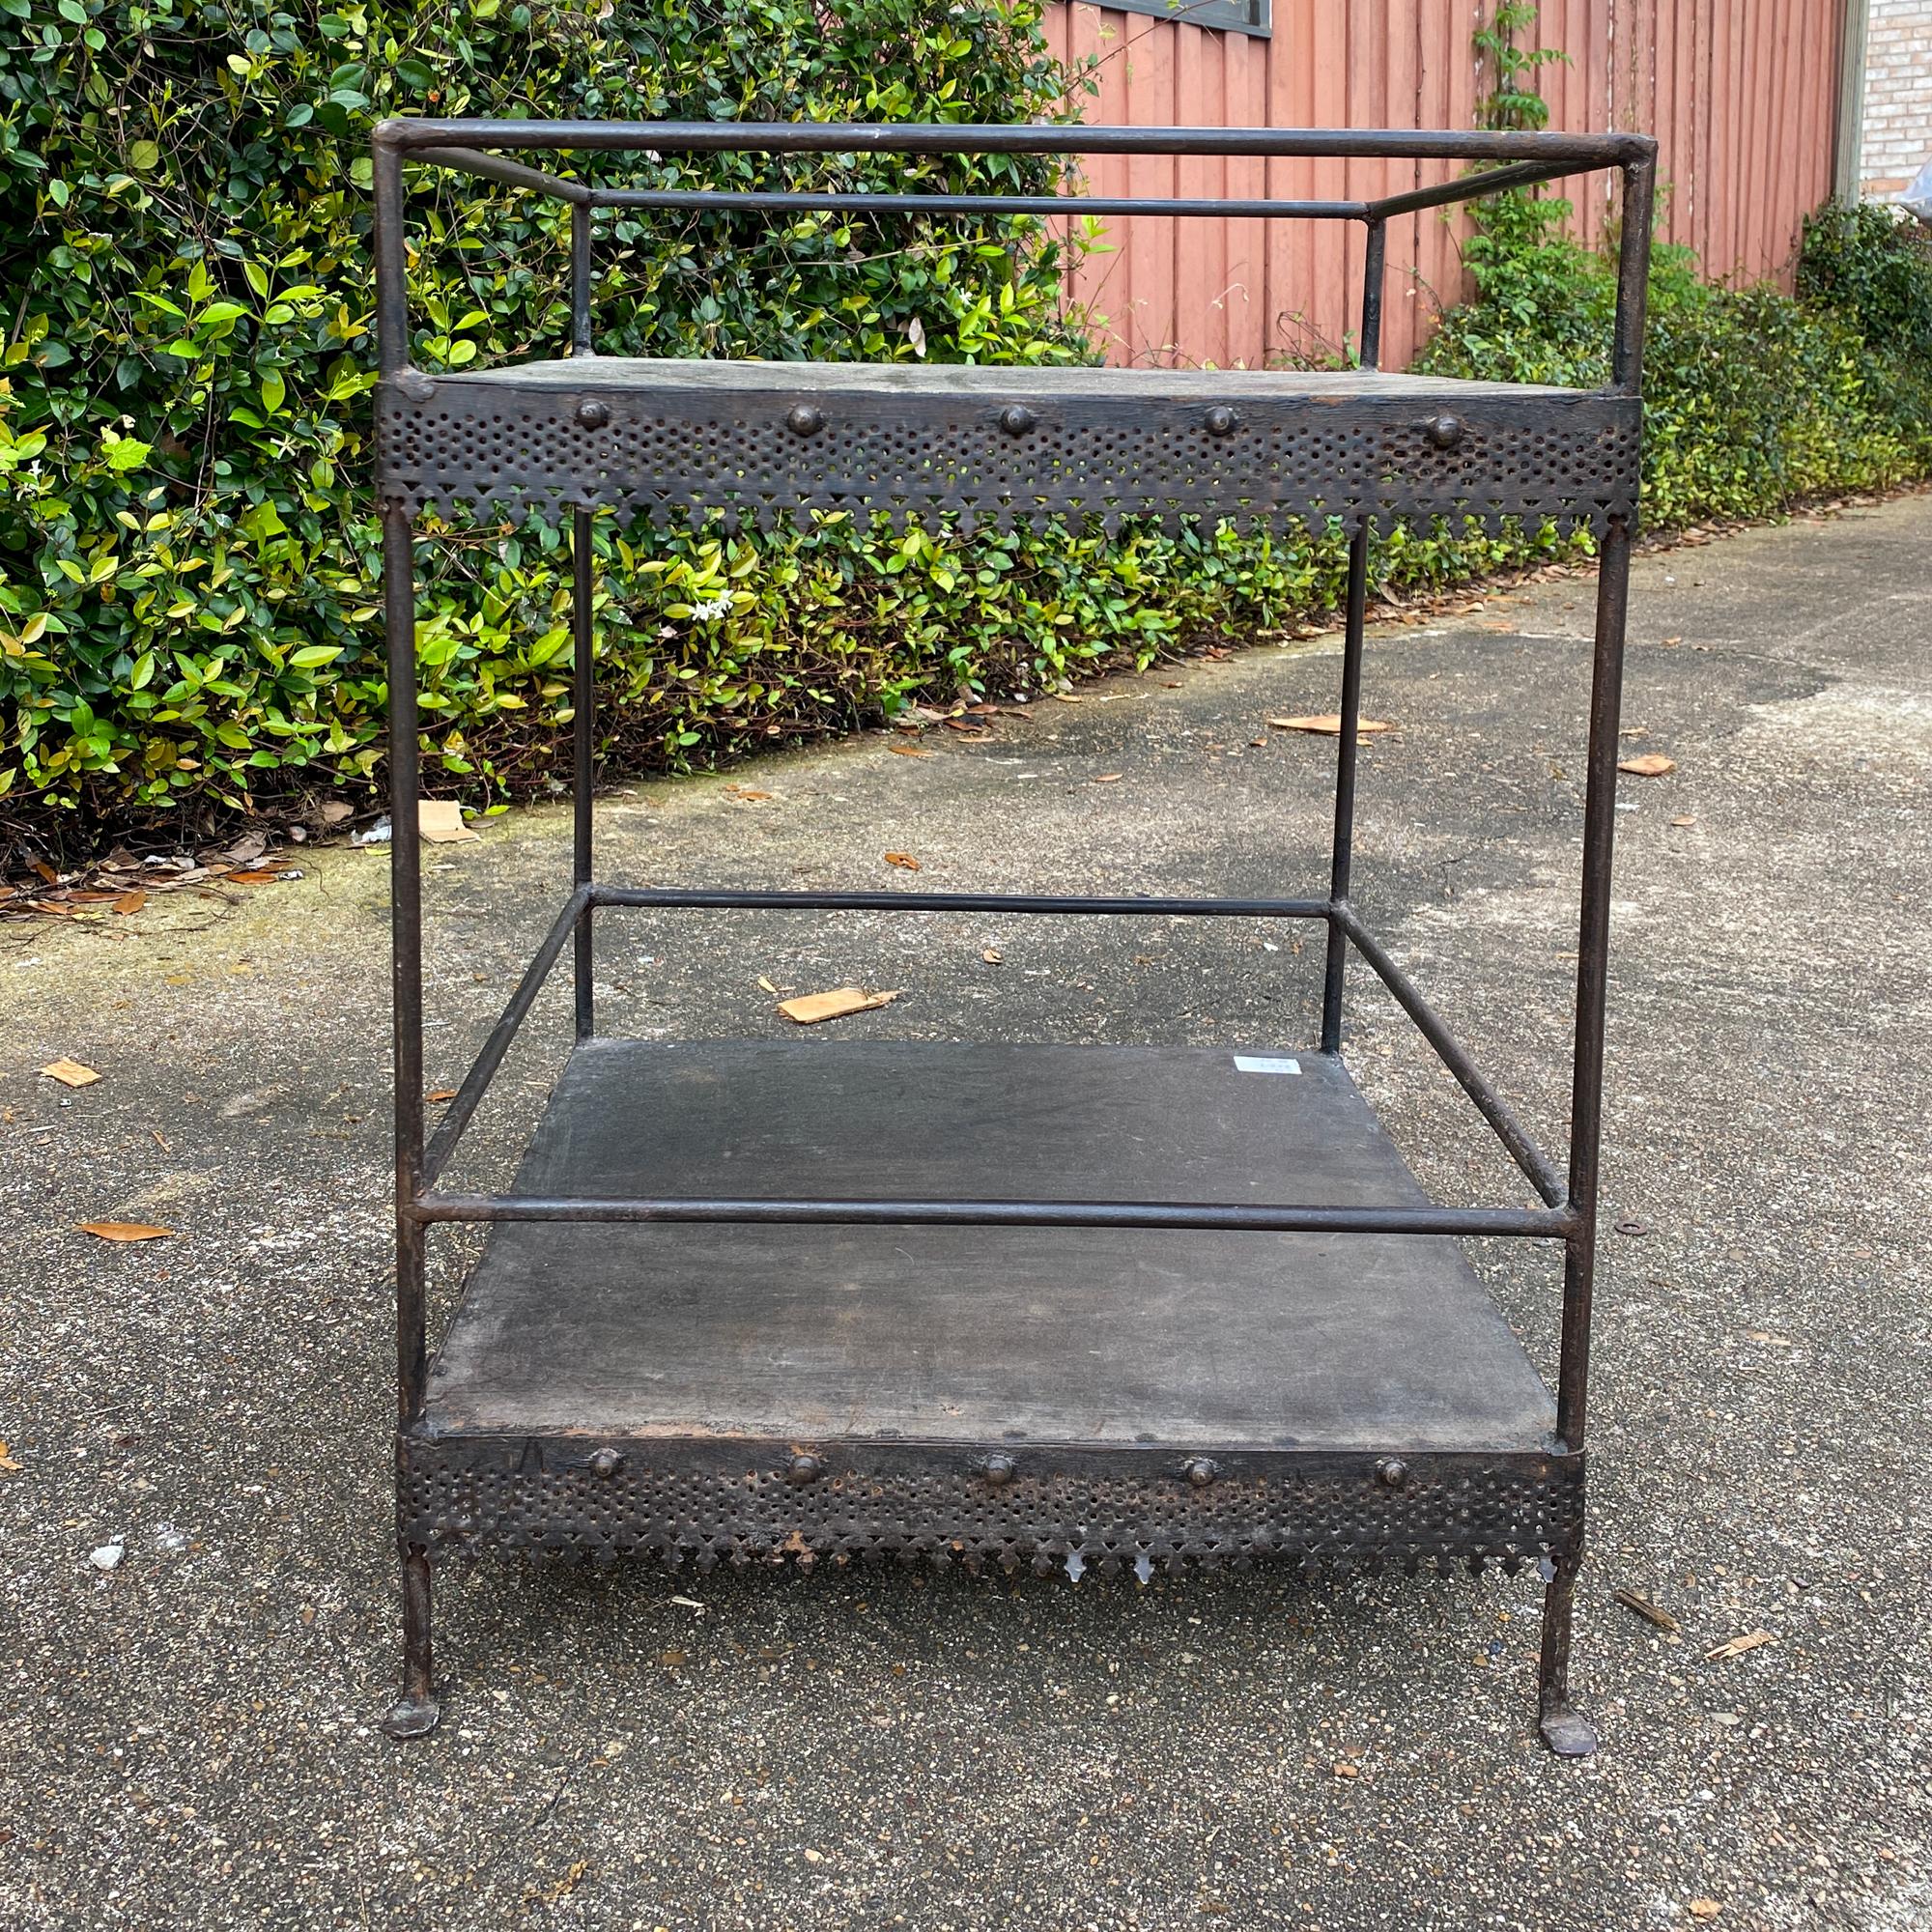 This charming, 1940s French metal table has two levels, both with a pierced metal apron detail which is very gothic in style. The simple lines allow the decoration to take center stage and is perfect for use as a plant stand or small side table. The